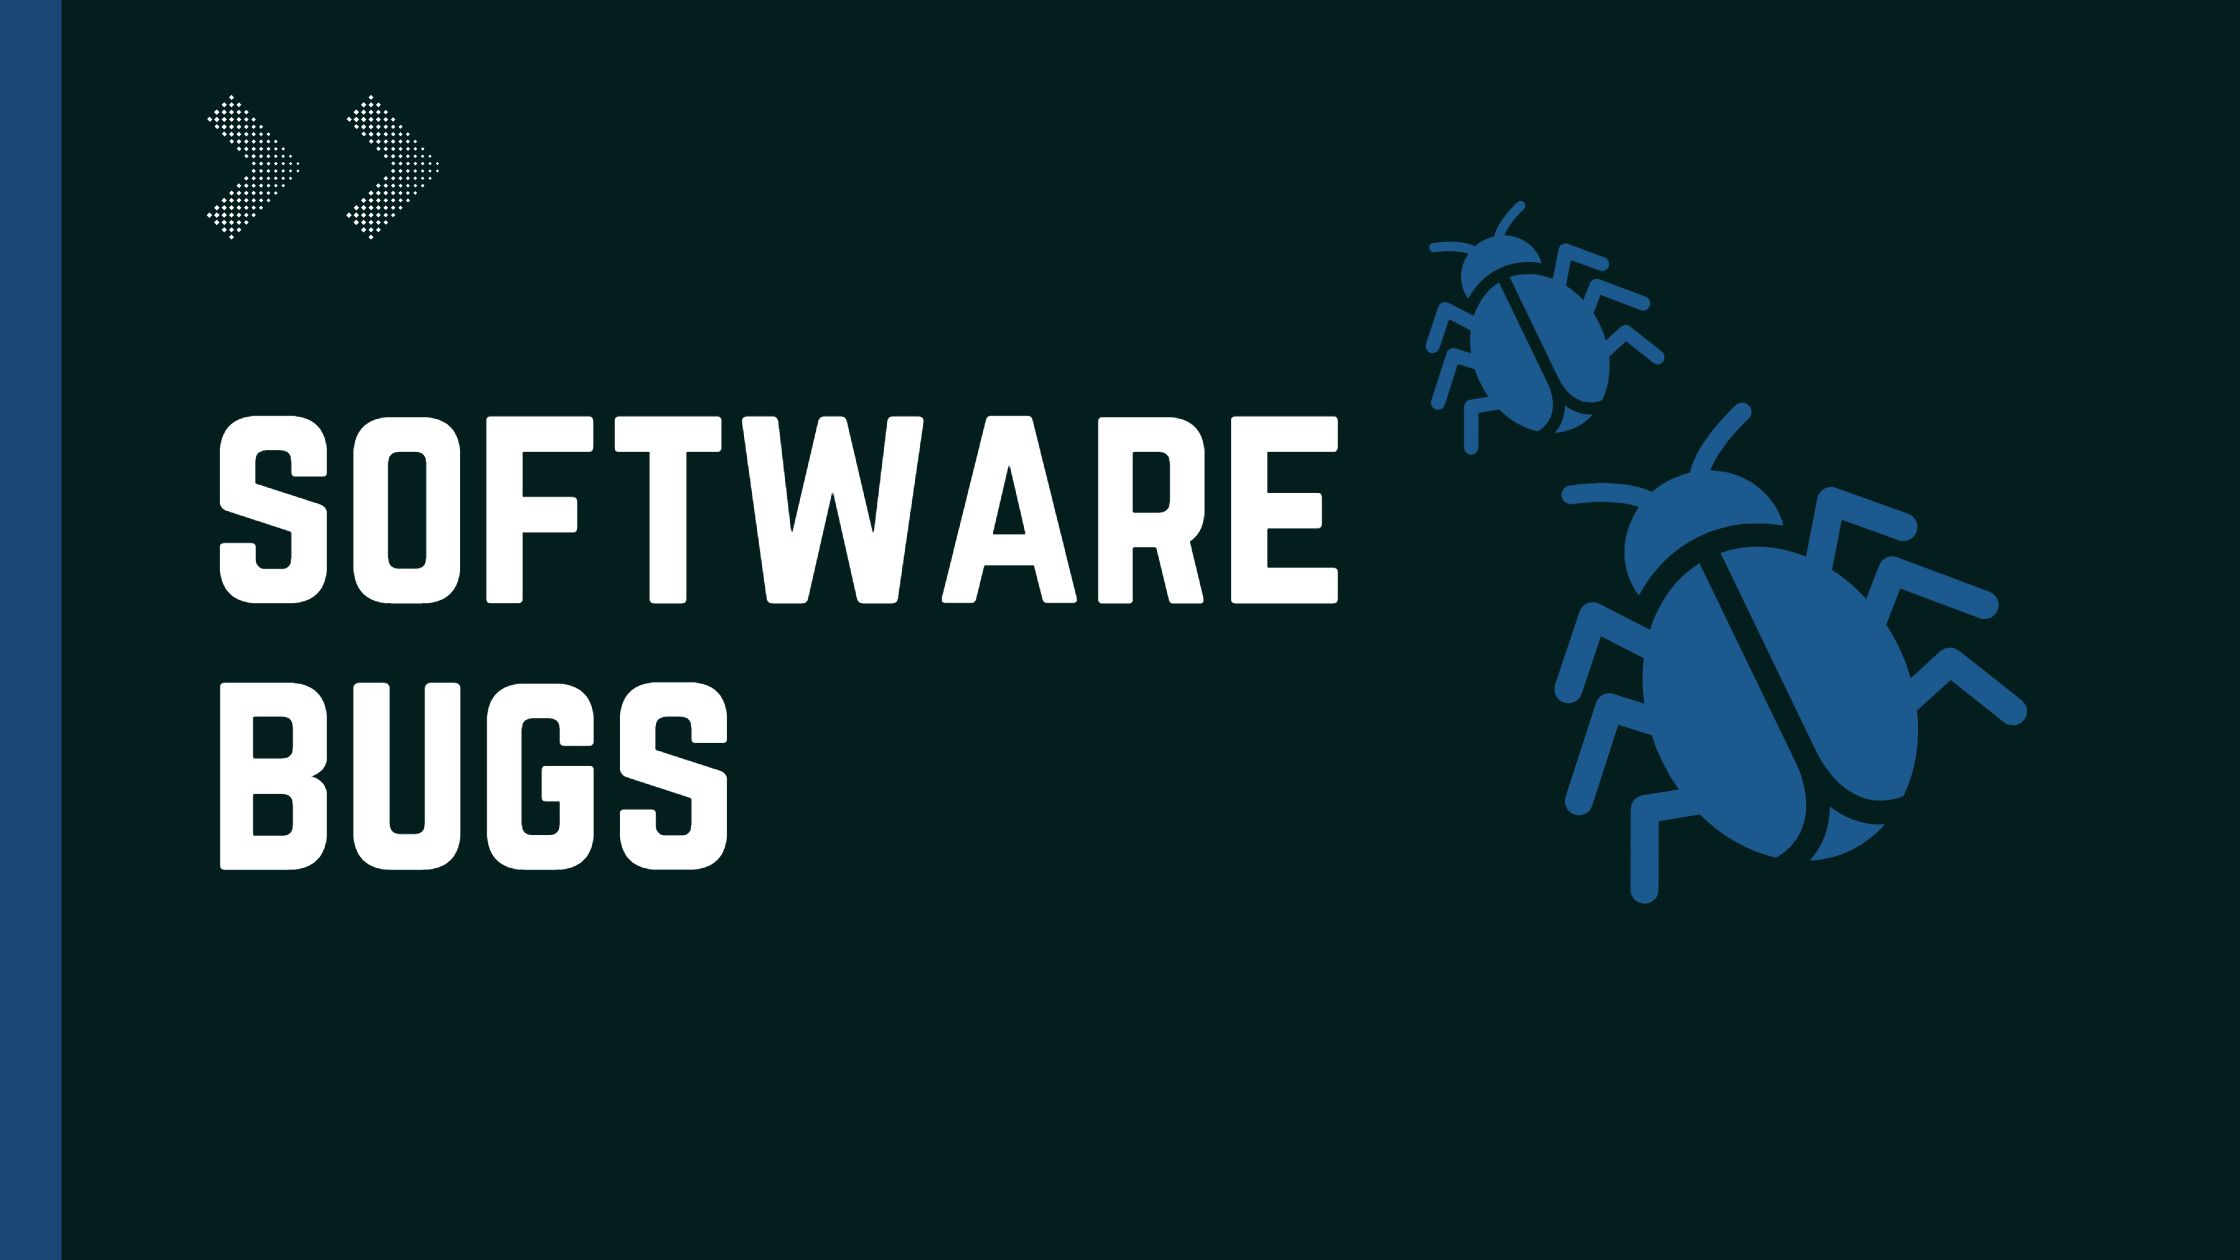 Interesting facts about software "bugs"